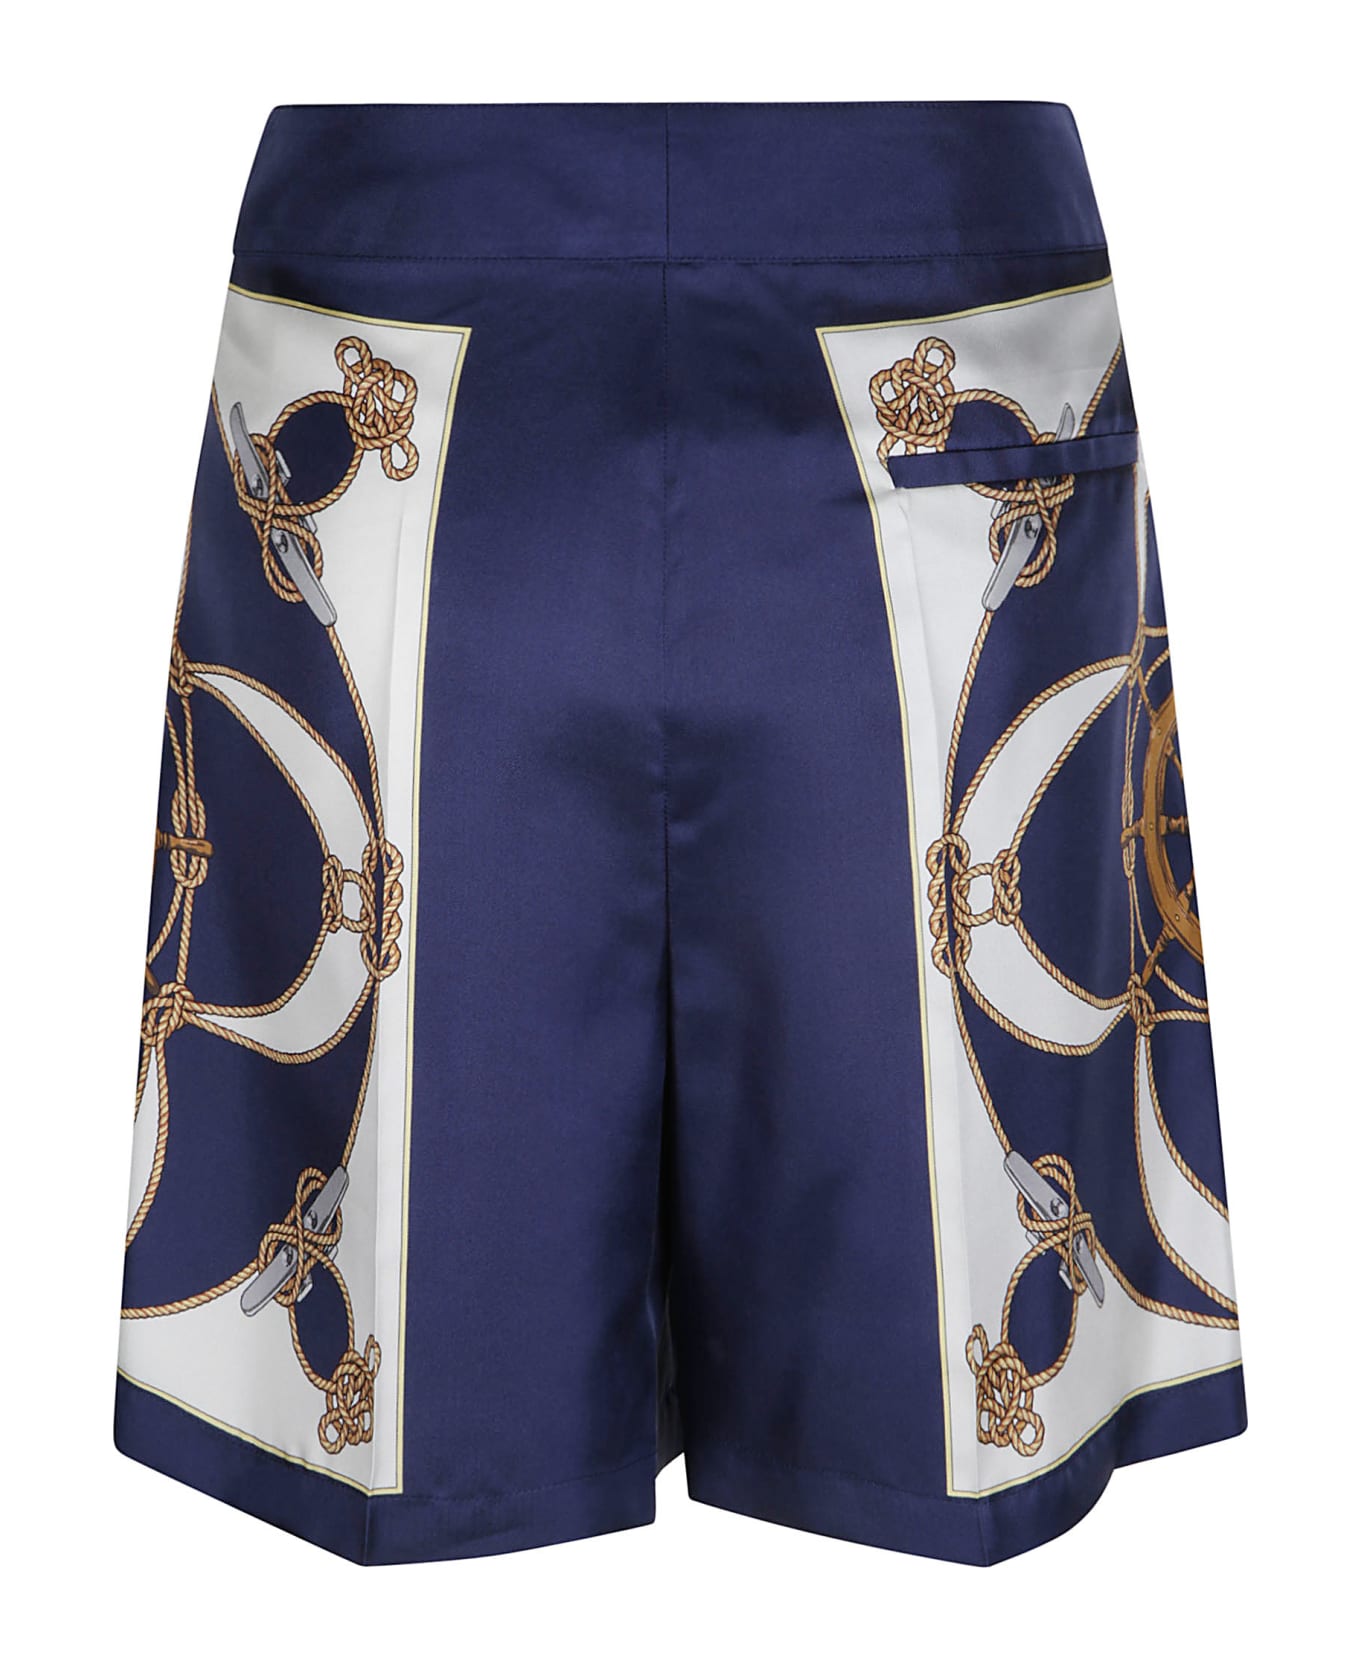 Bally Mid-rise Helm Printed Shorts - Blue